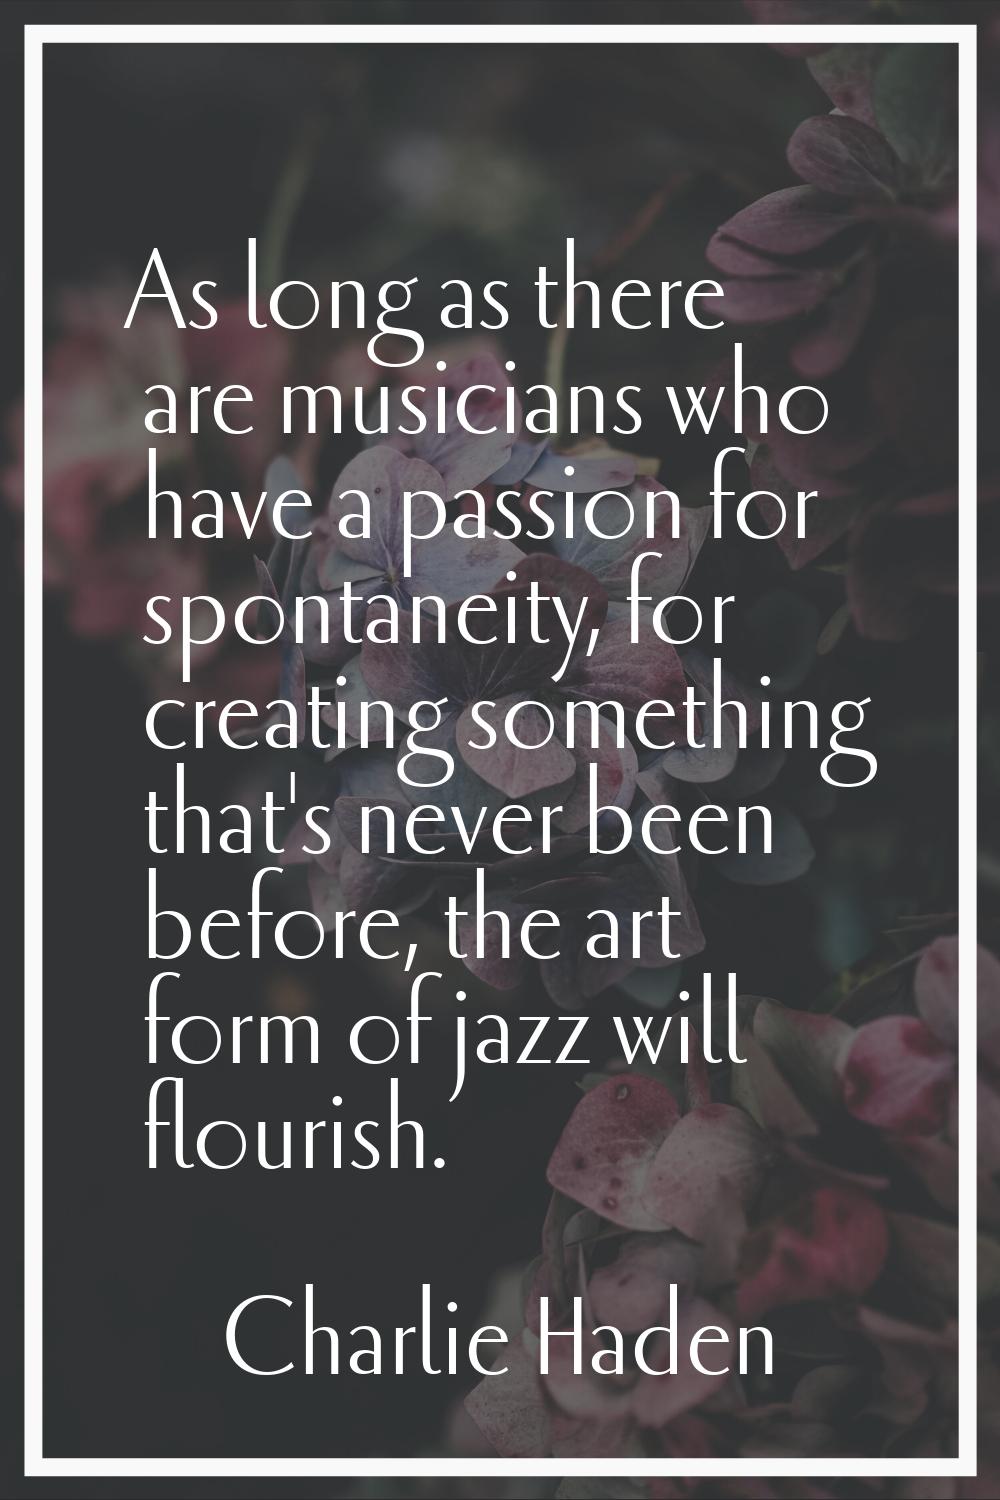 As long as there are musicians who have a passion for spontaneity, for creating something that's ne